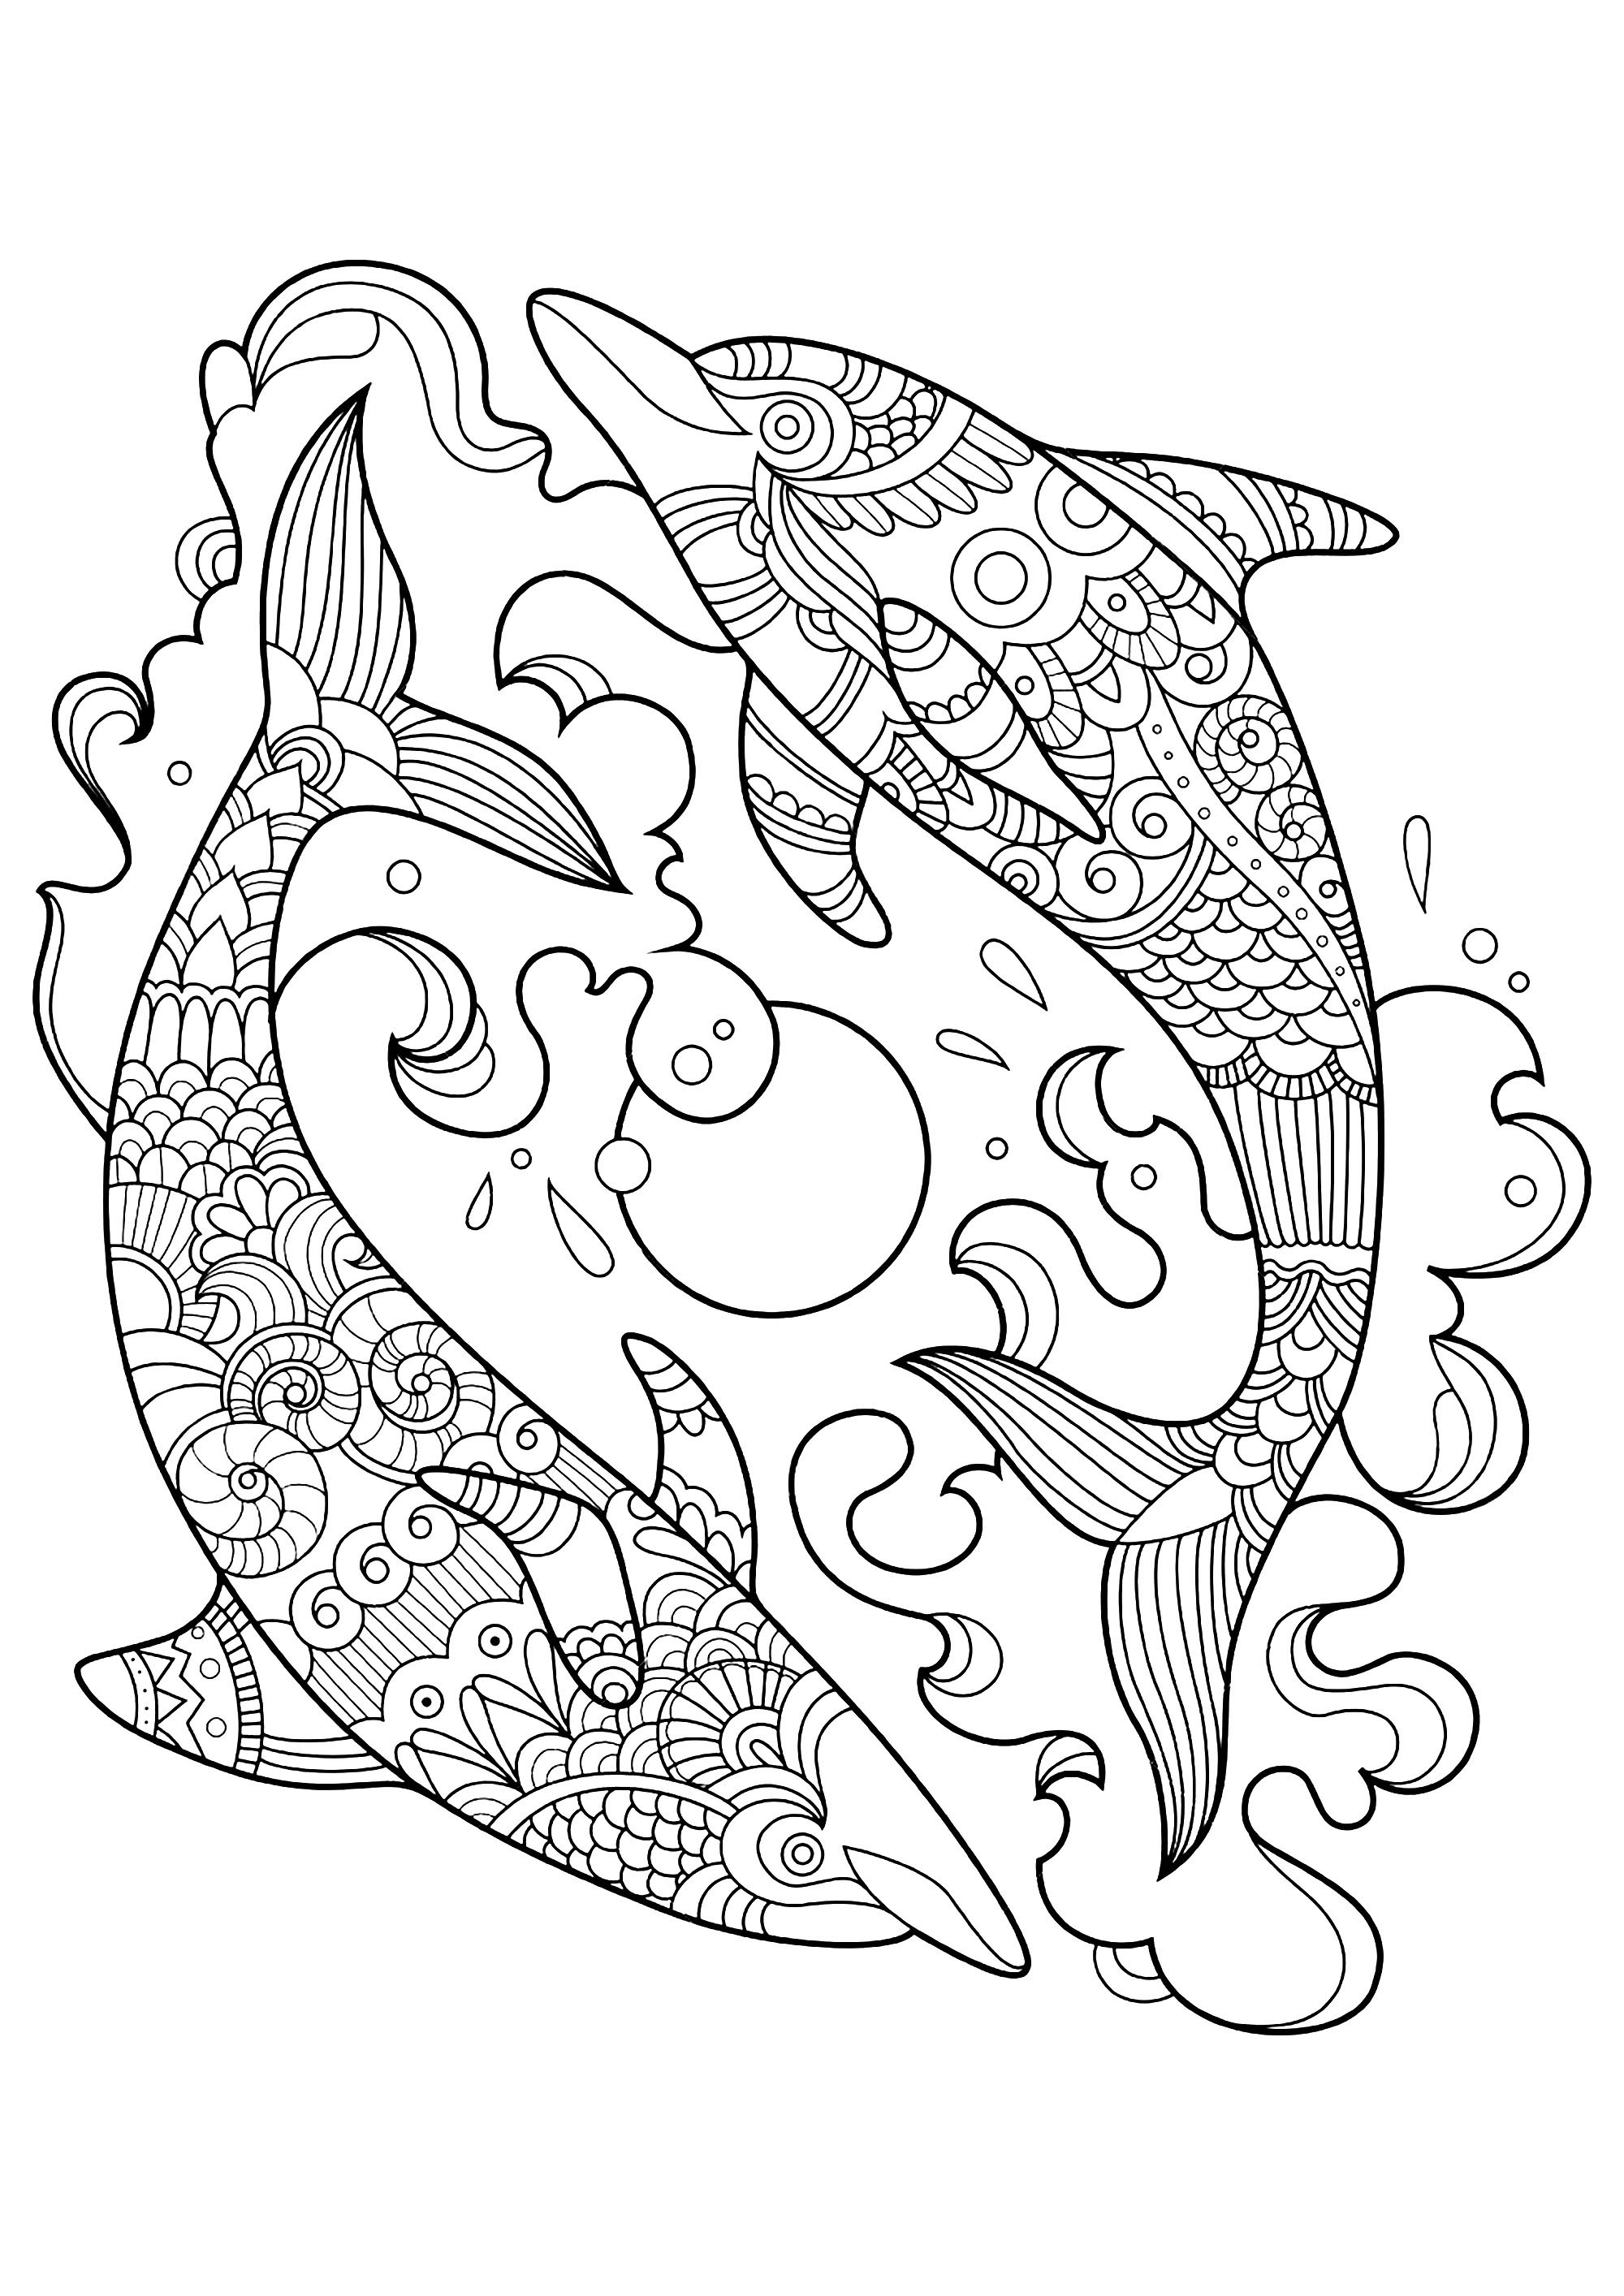 coloring dolphins free printable dolphin coloring pages for kids coloring dolphins 1 2